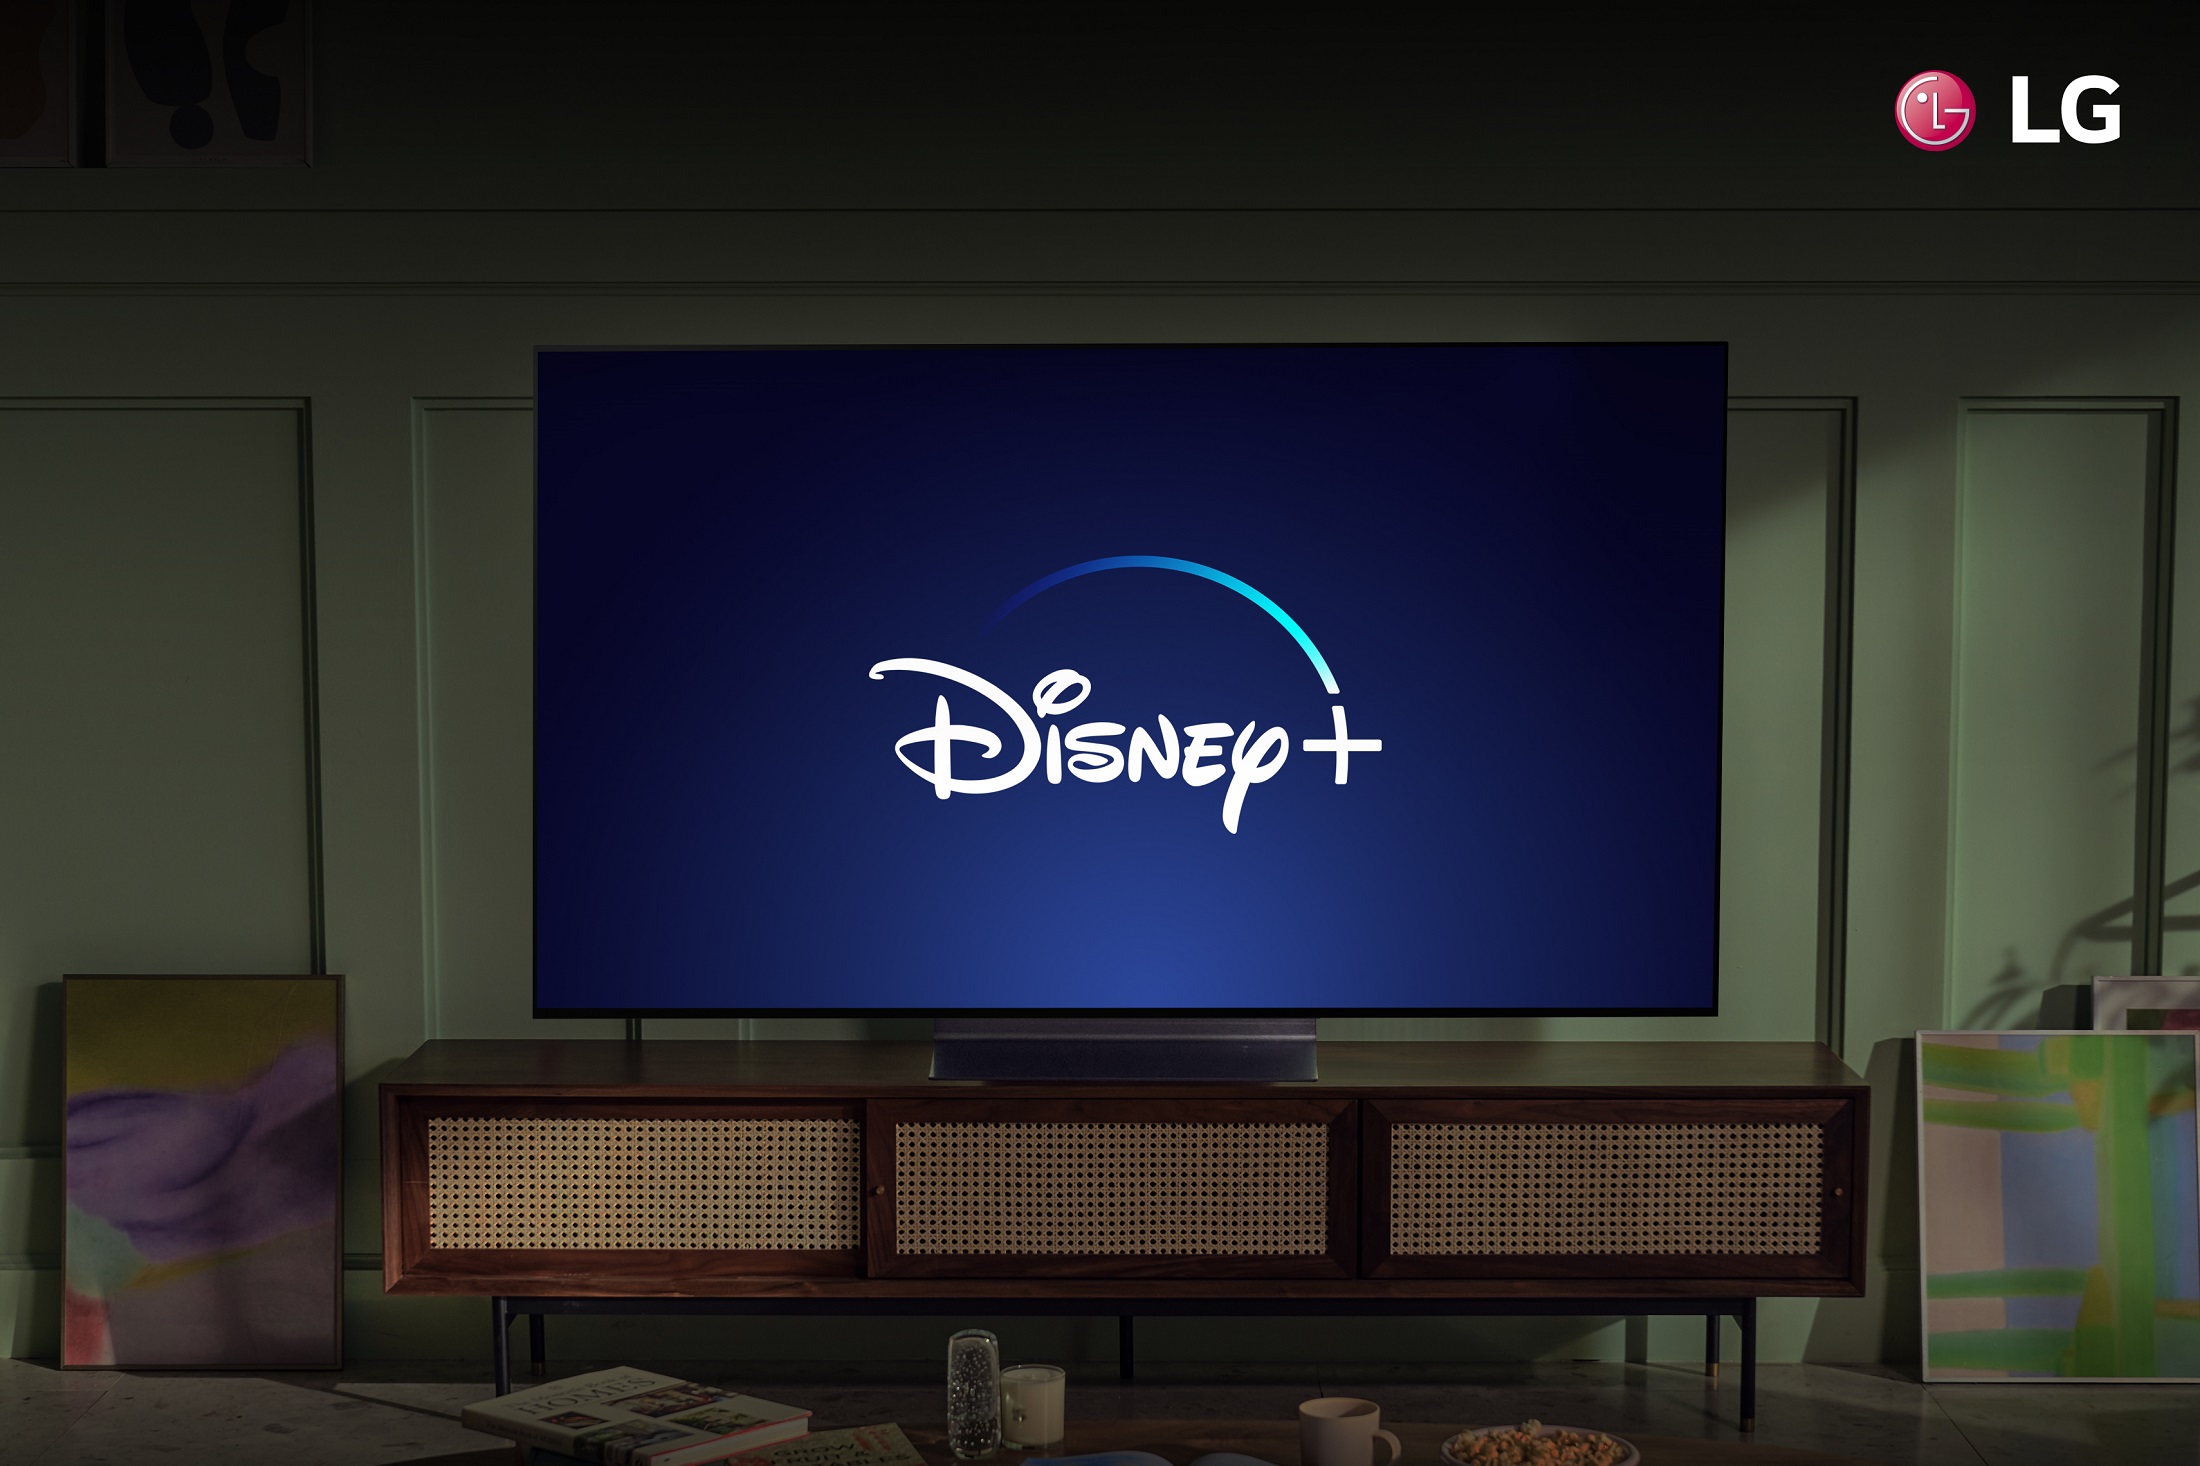 An LG TV in a living room displaying the Disney+ logo to celebrate the streaming service coming to more LG Smart TVs